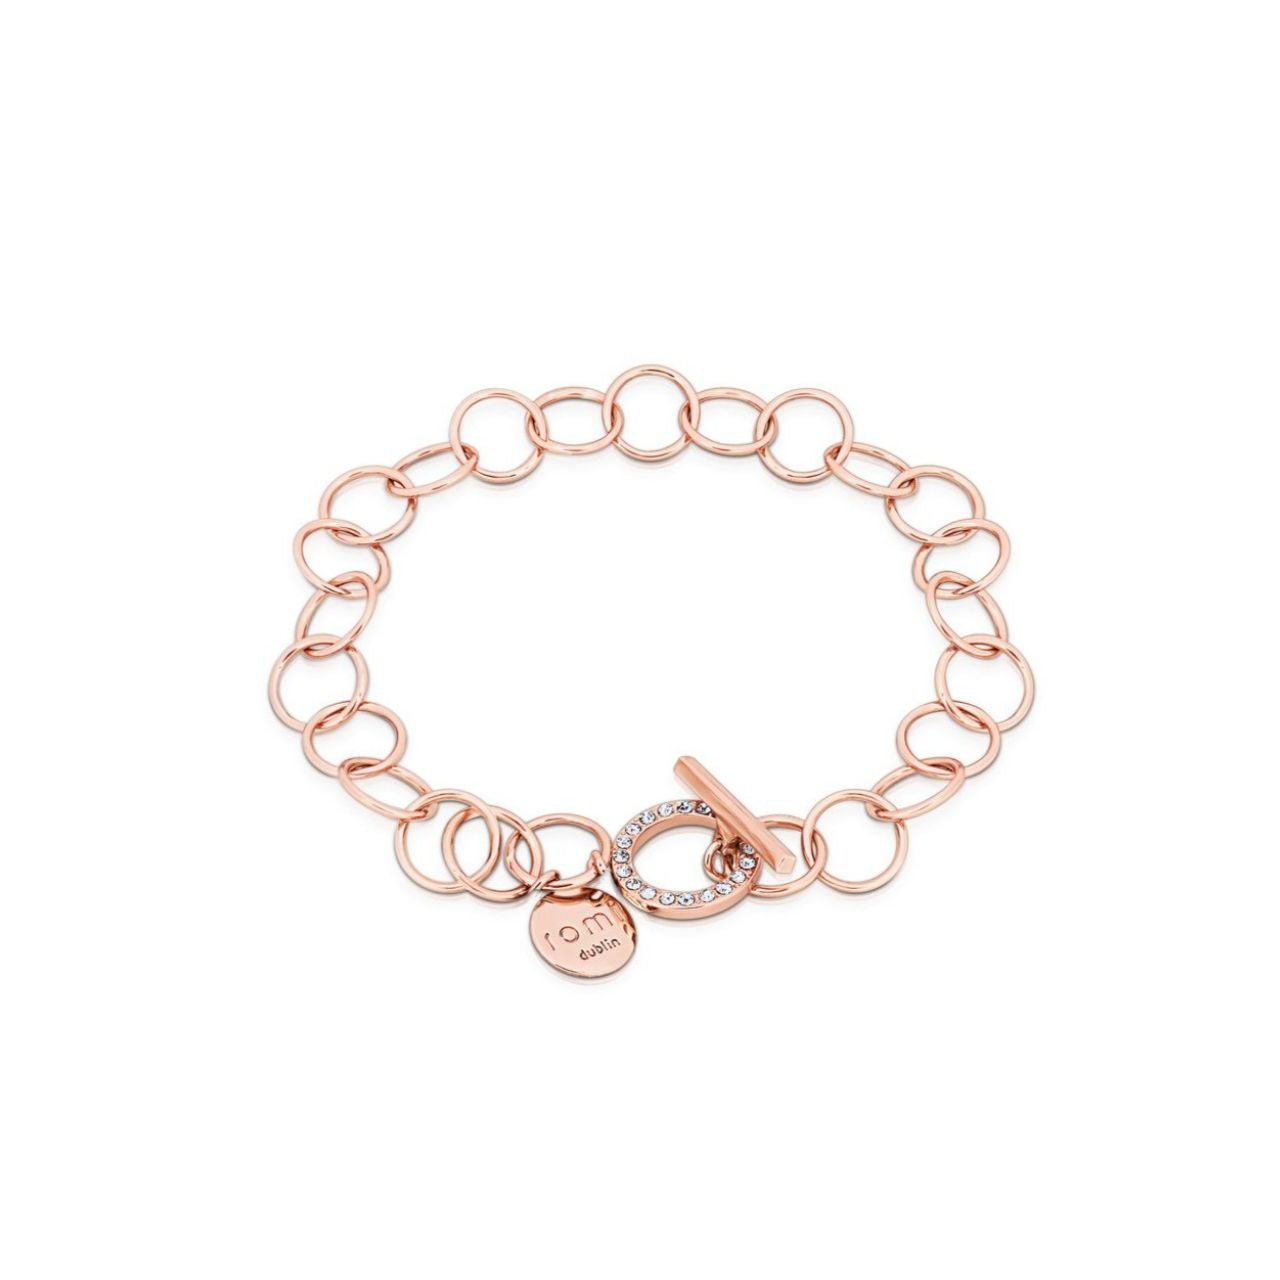 Tipperary Crystal Romi Dublin Rose Gold Circle Bar Light Bracelet  Simple and understated this collection has a contemporary and sleek look that will allow you to accessorise with any outfit.